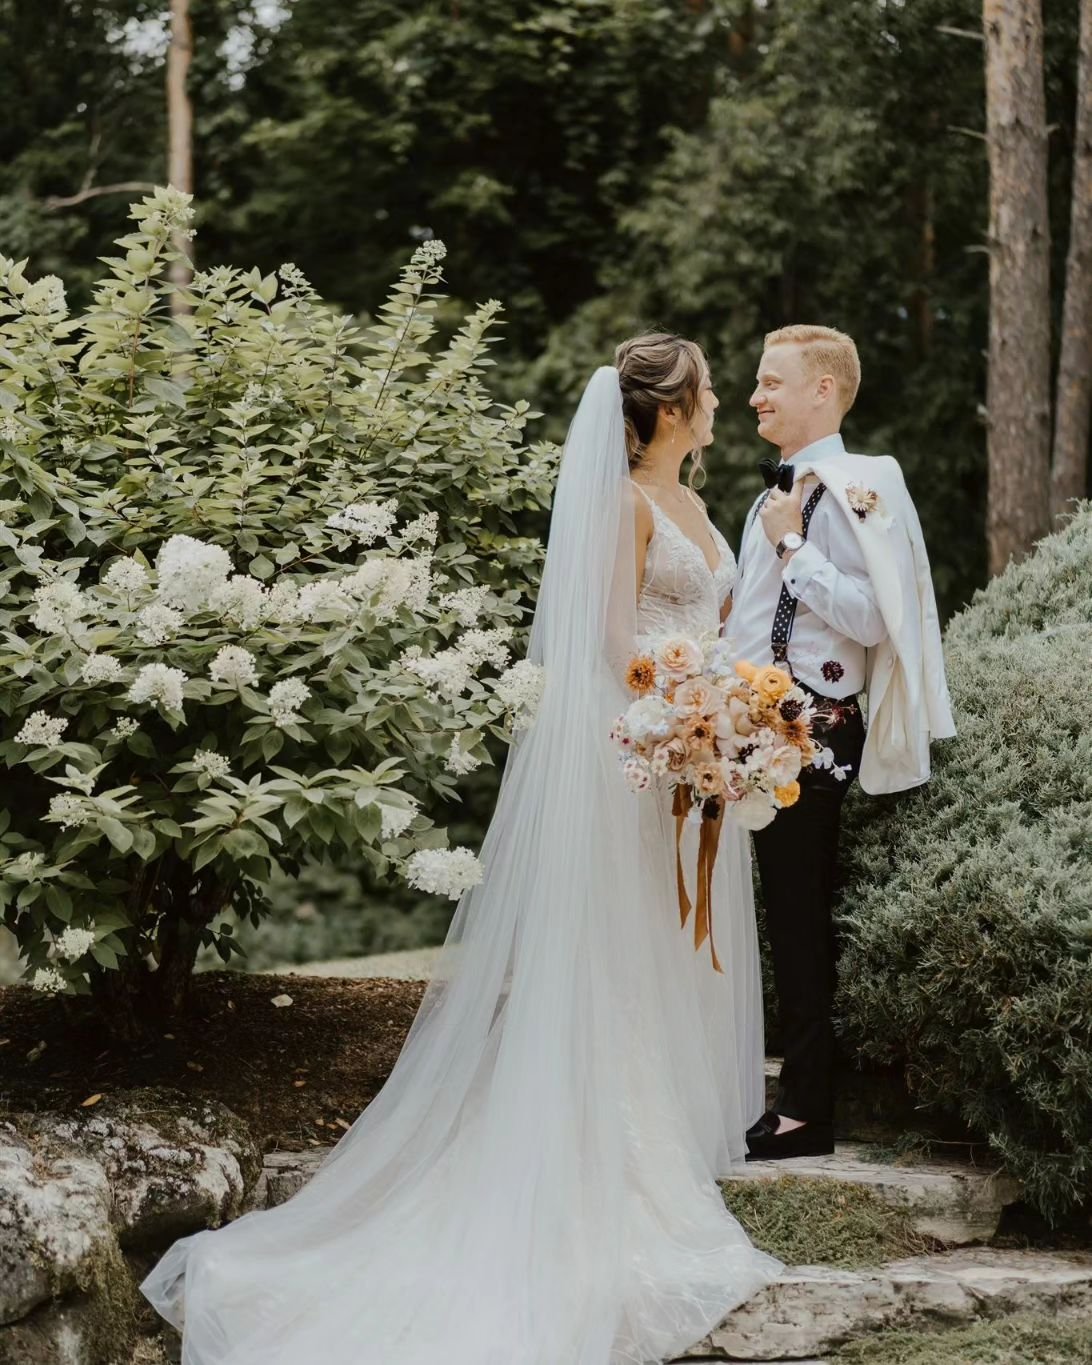 The most perfect forest road for wedding portraits 🤍

Cissy and Adam | Private Estate Planning

@jessilynnwongphotography